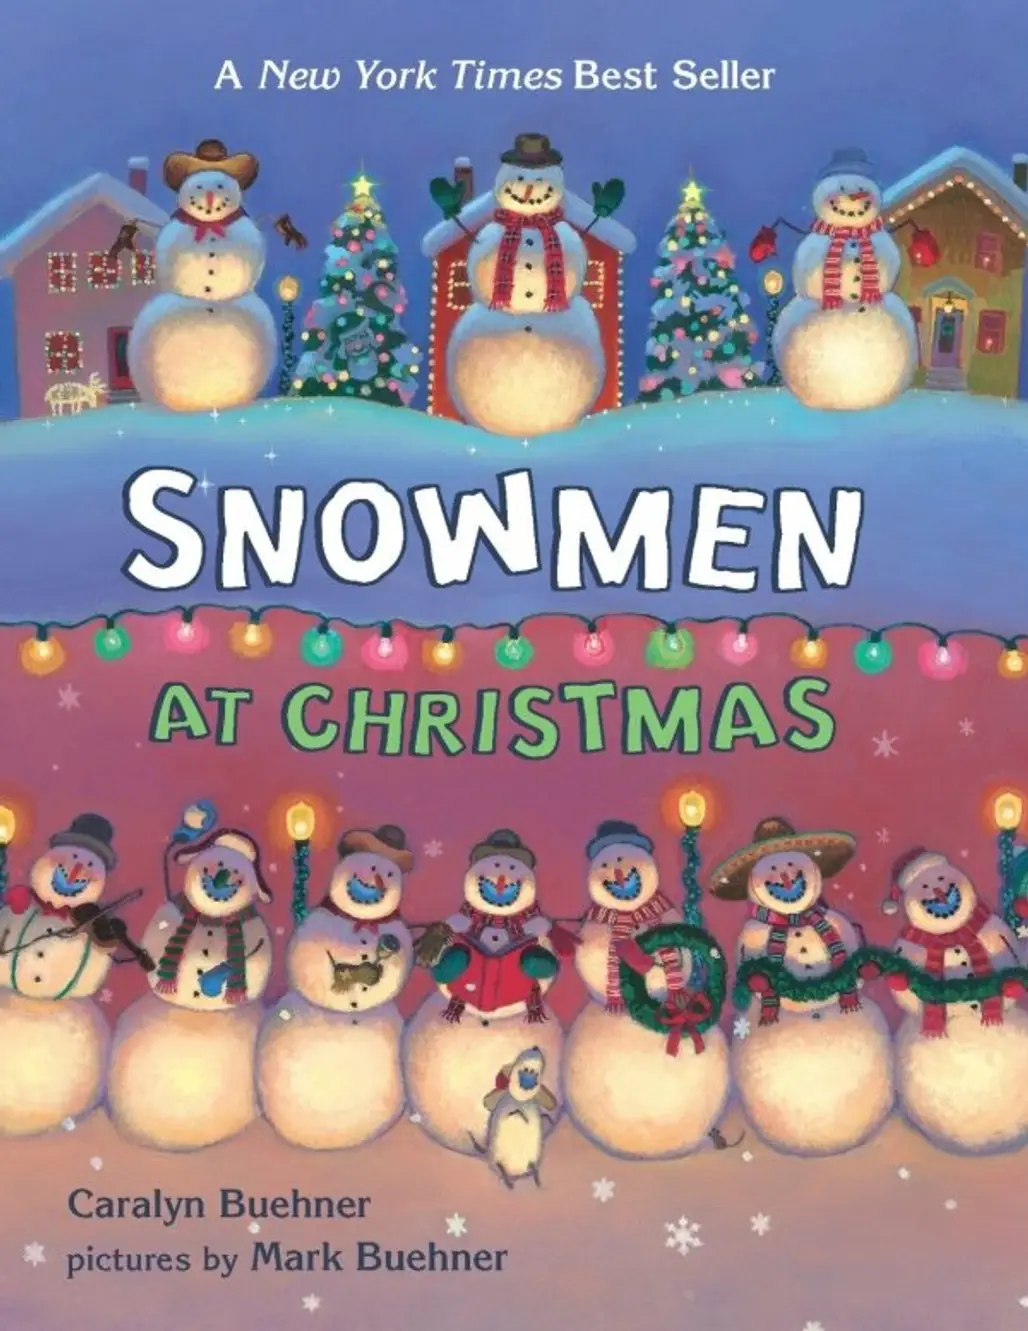 Snowmen at Christmas by Caralyn and Mark Buehner